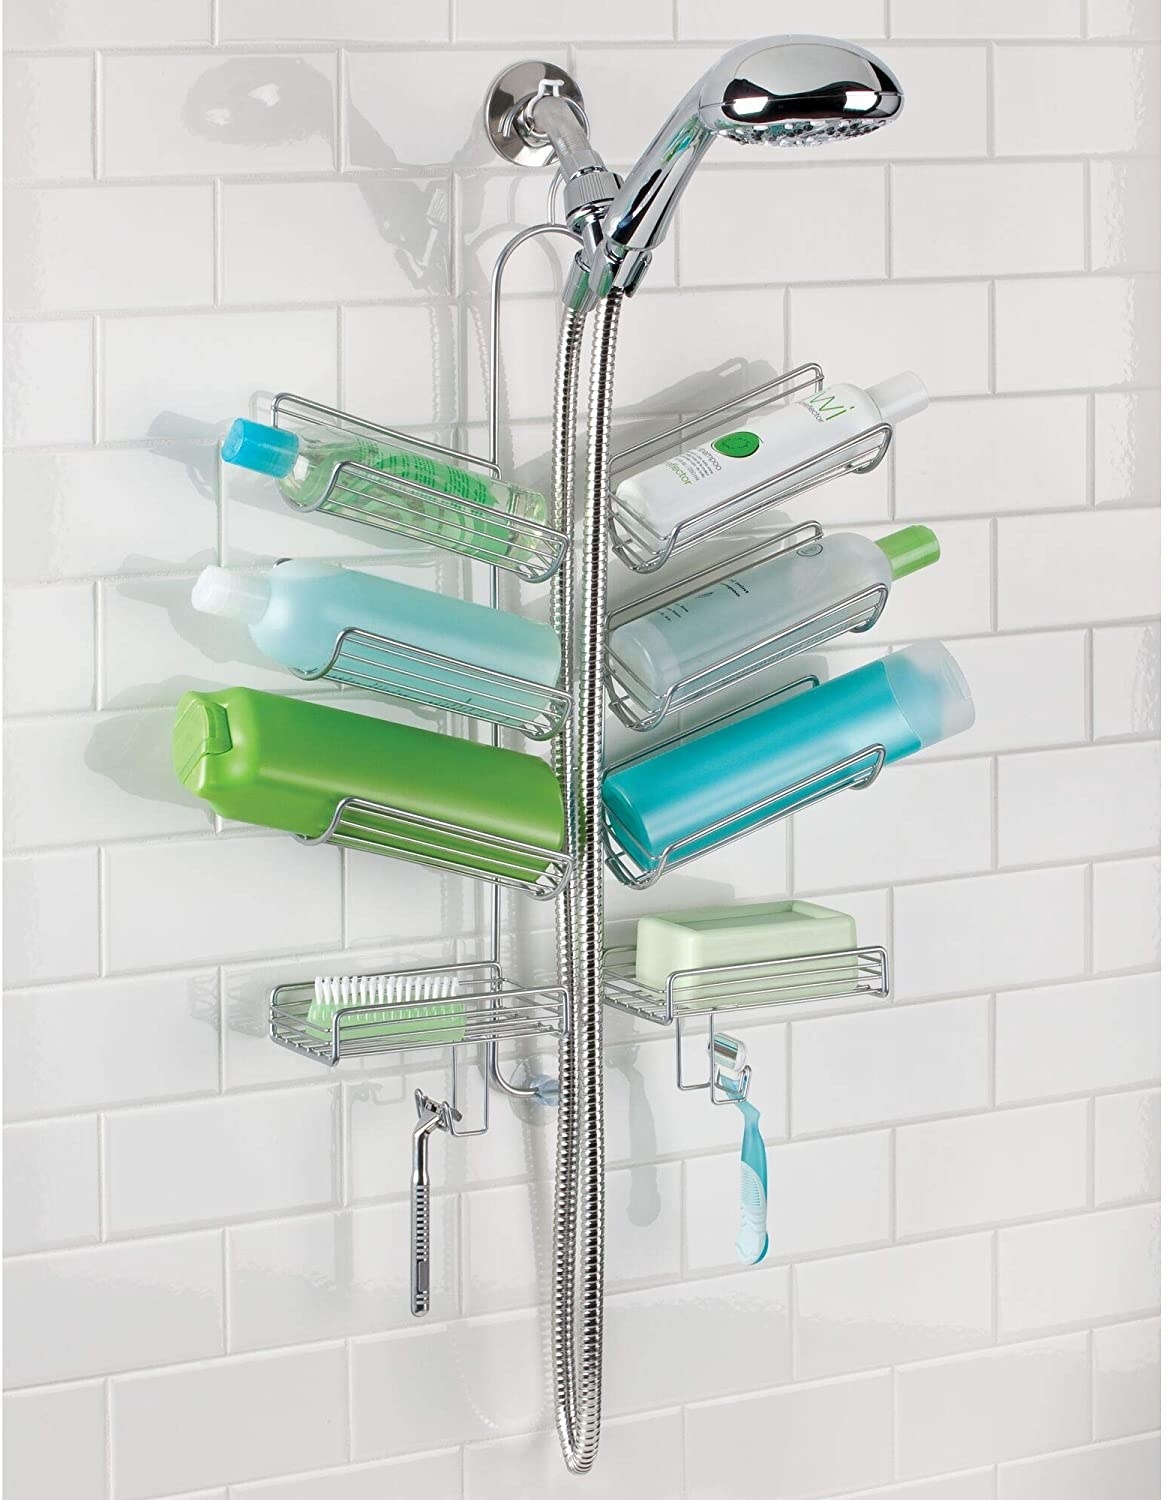 The shower caddy filled with products